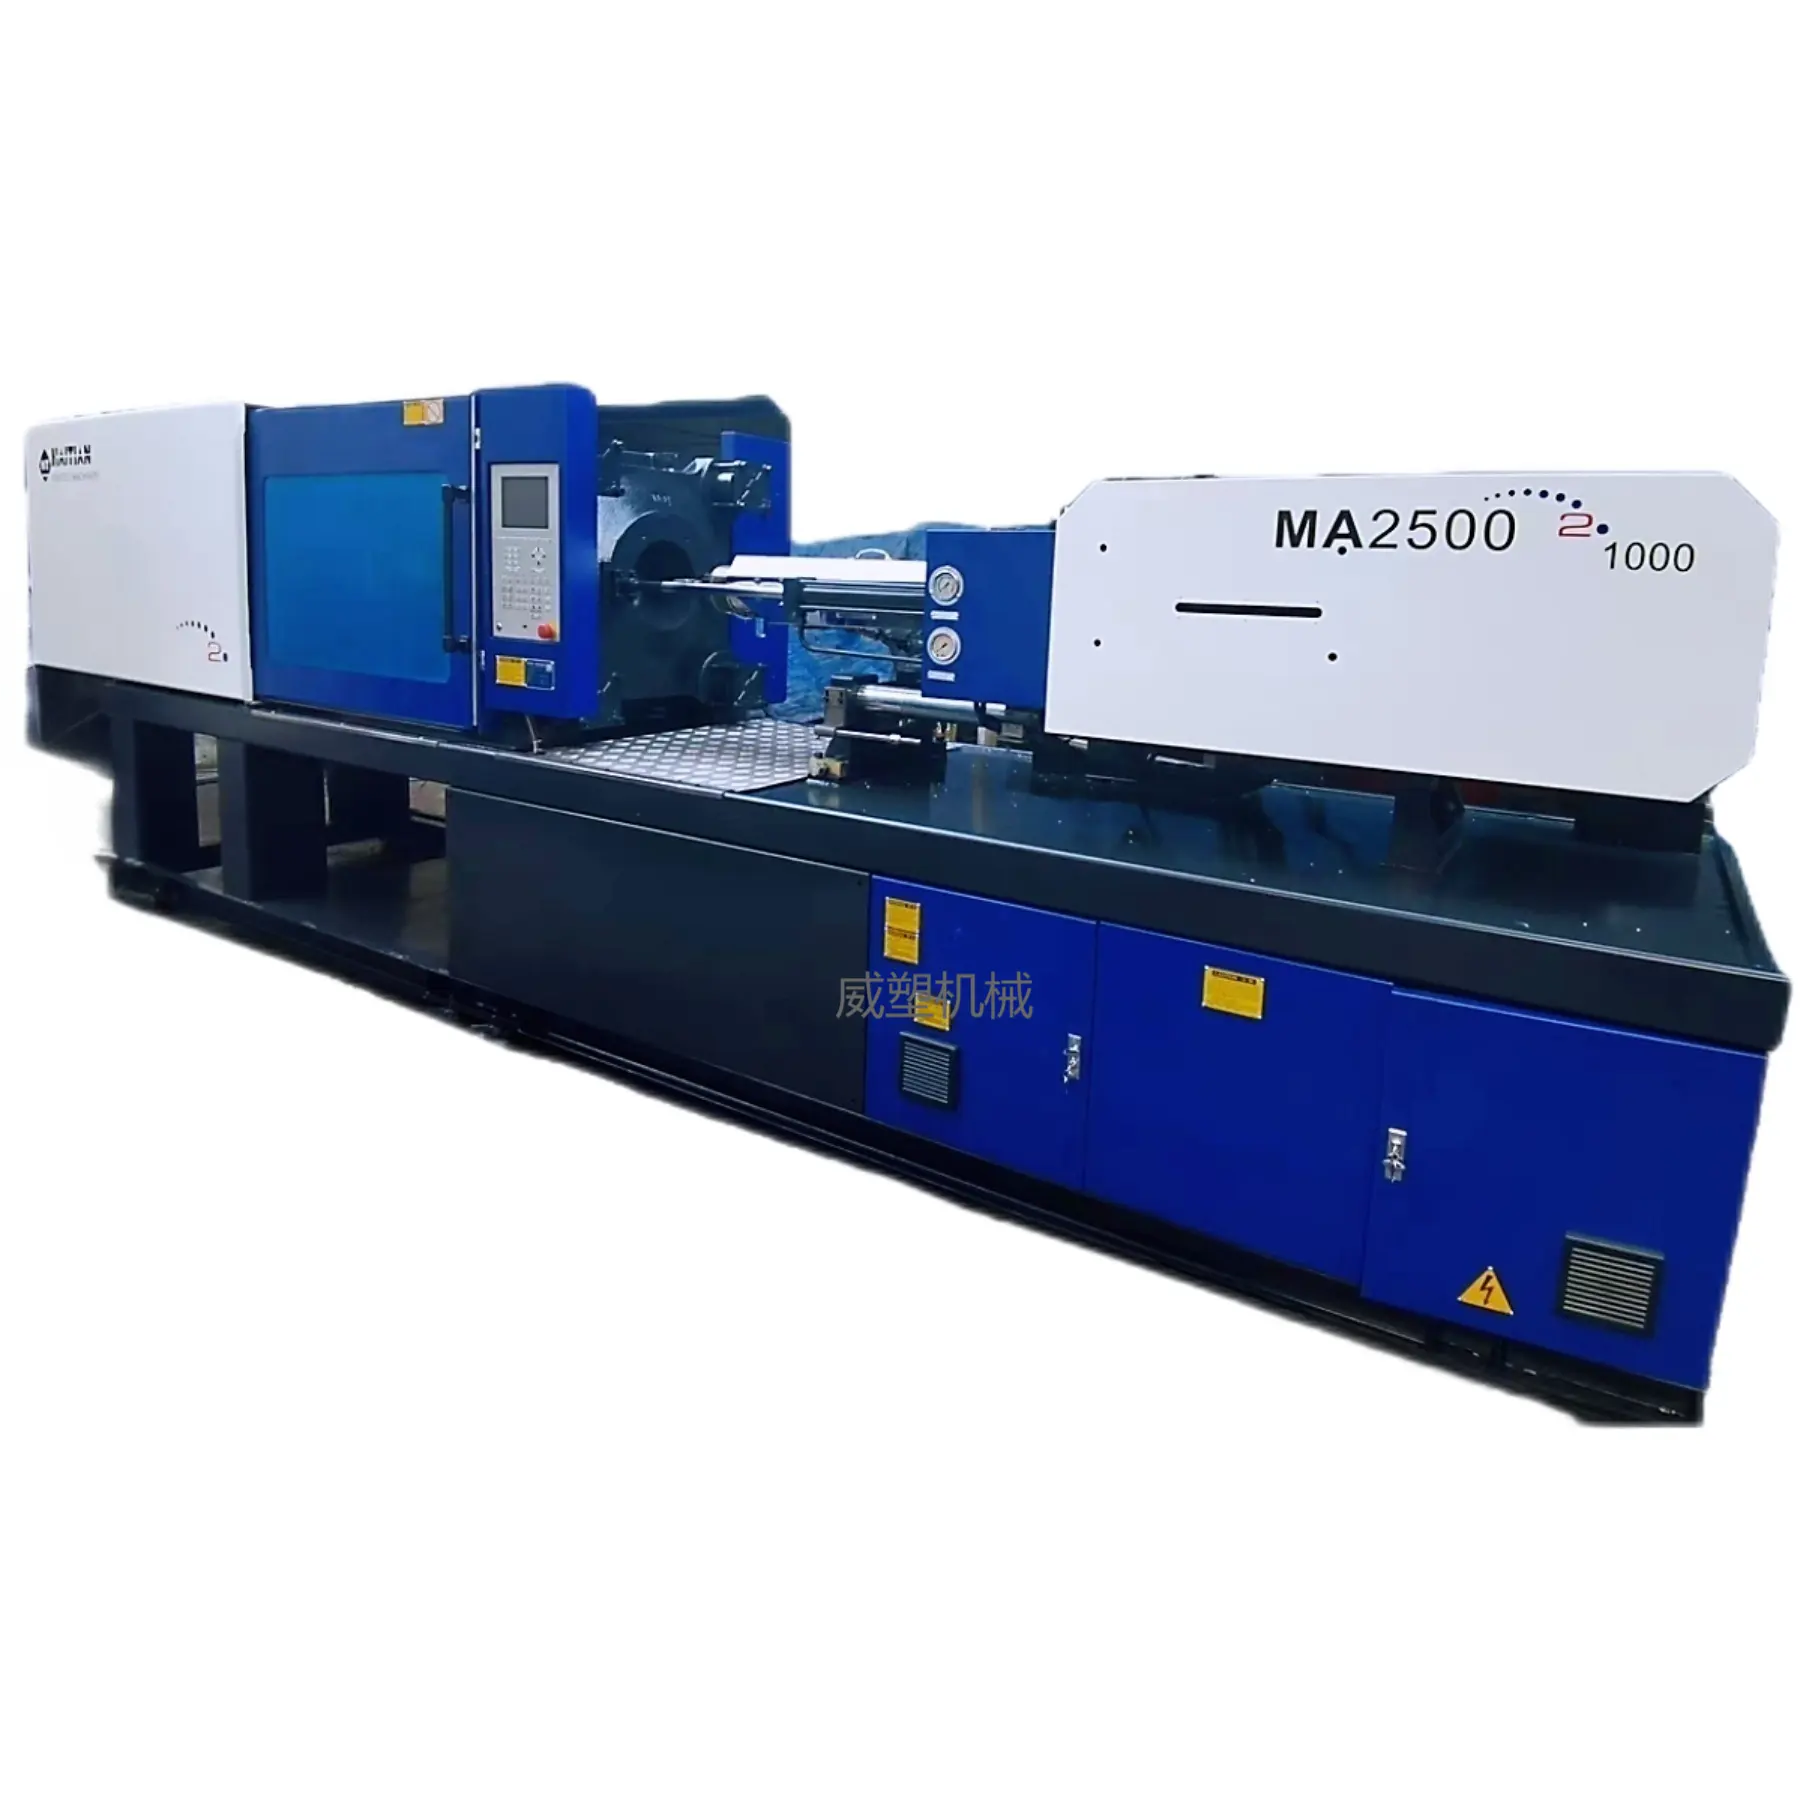 Preferential injection molding machine Plastic fan molding machine Haitian 250 tons of second-hand injection molding machine